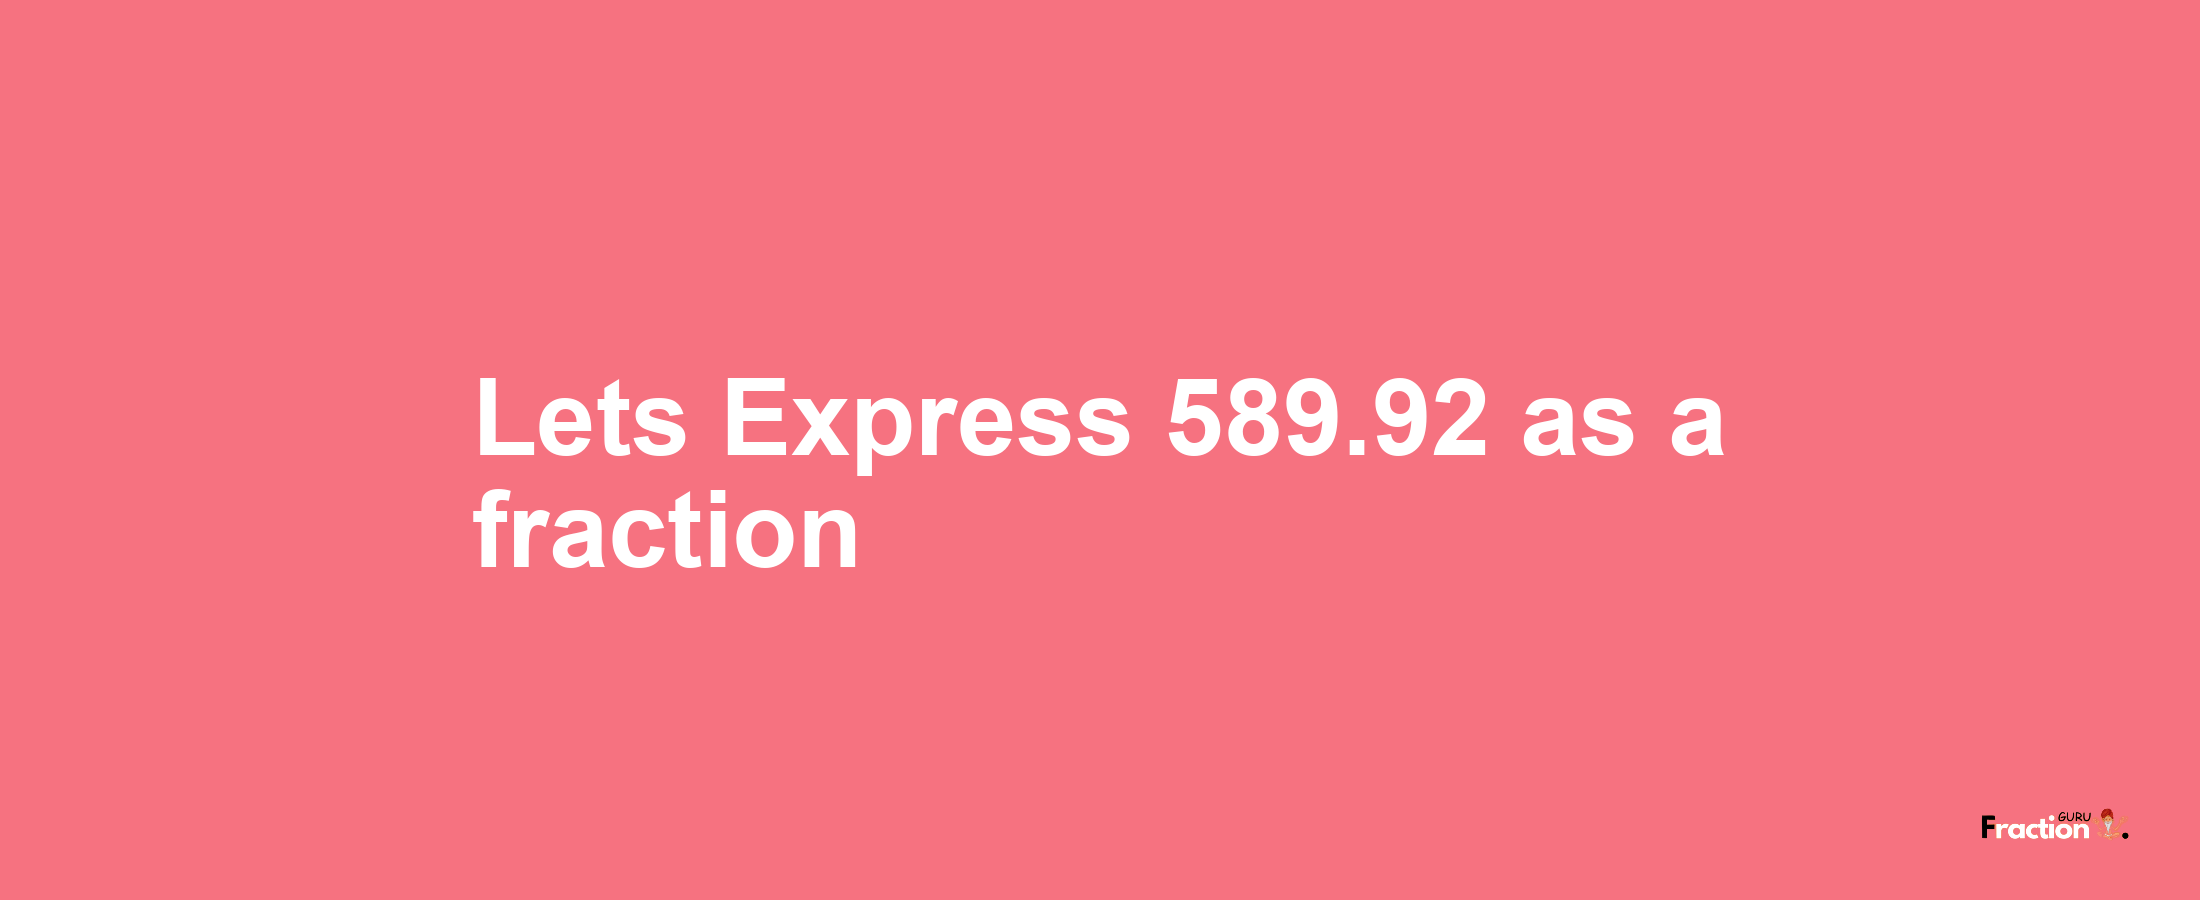 Lets Express 589.92 as afraction